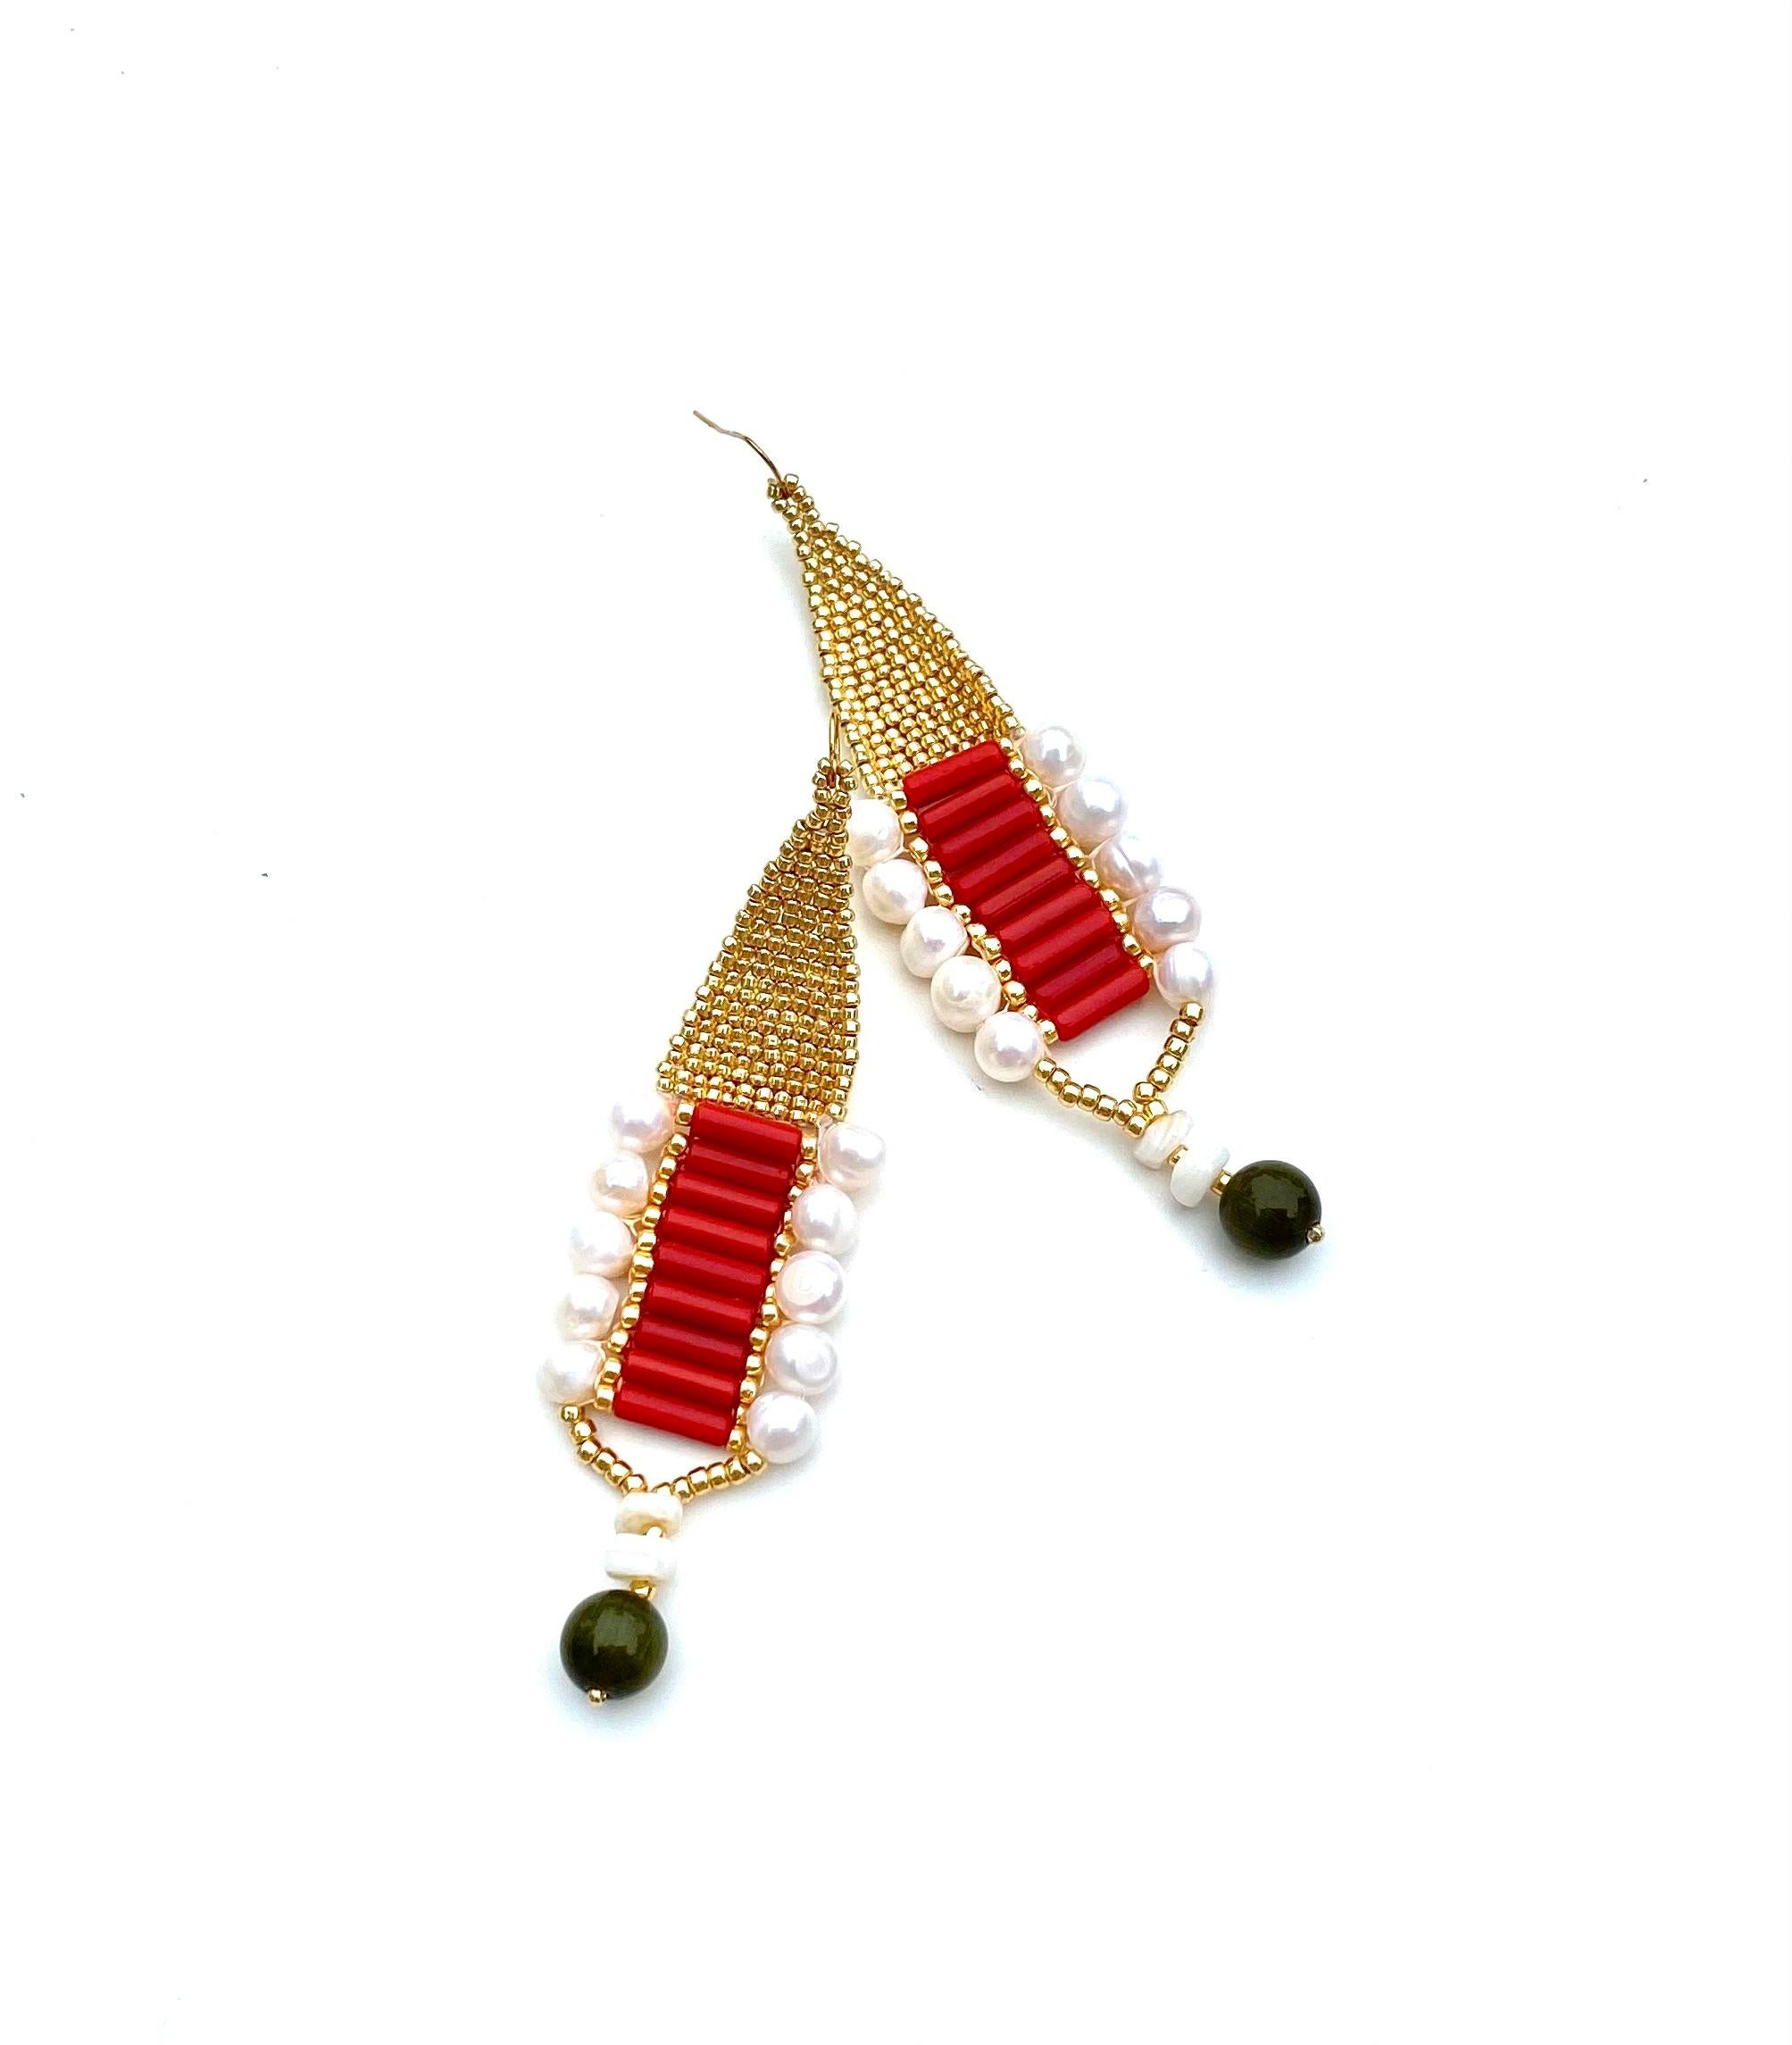 Handwoven permanent 14k gold plated glass seed beads adorned with authentic sustainably sourced red coral tubes, freshwater pearls, conch shell beads and olive-green cats eye glass round bead. 14k Gold plated earring hooks. 
Elegant and bold this